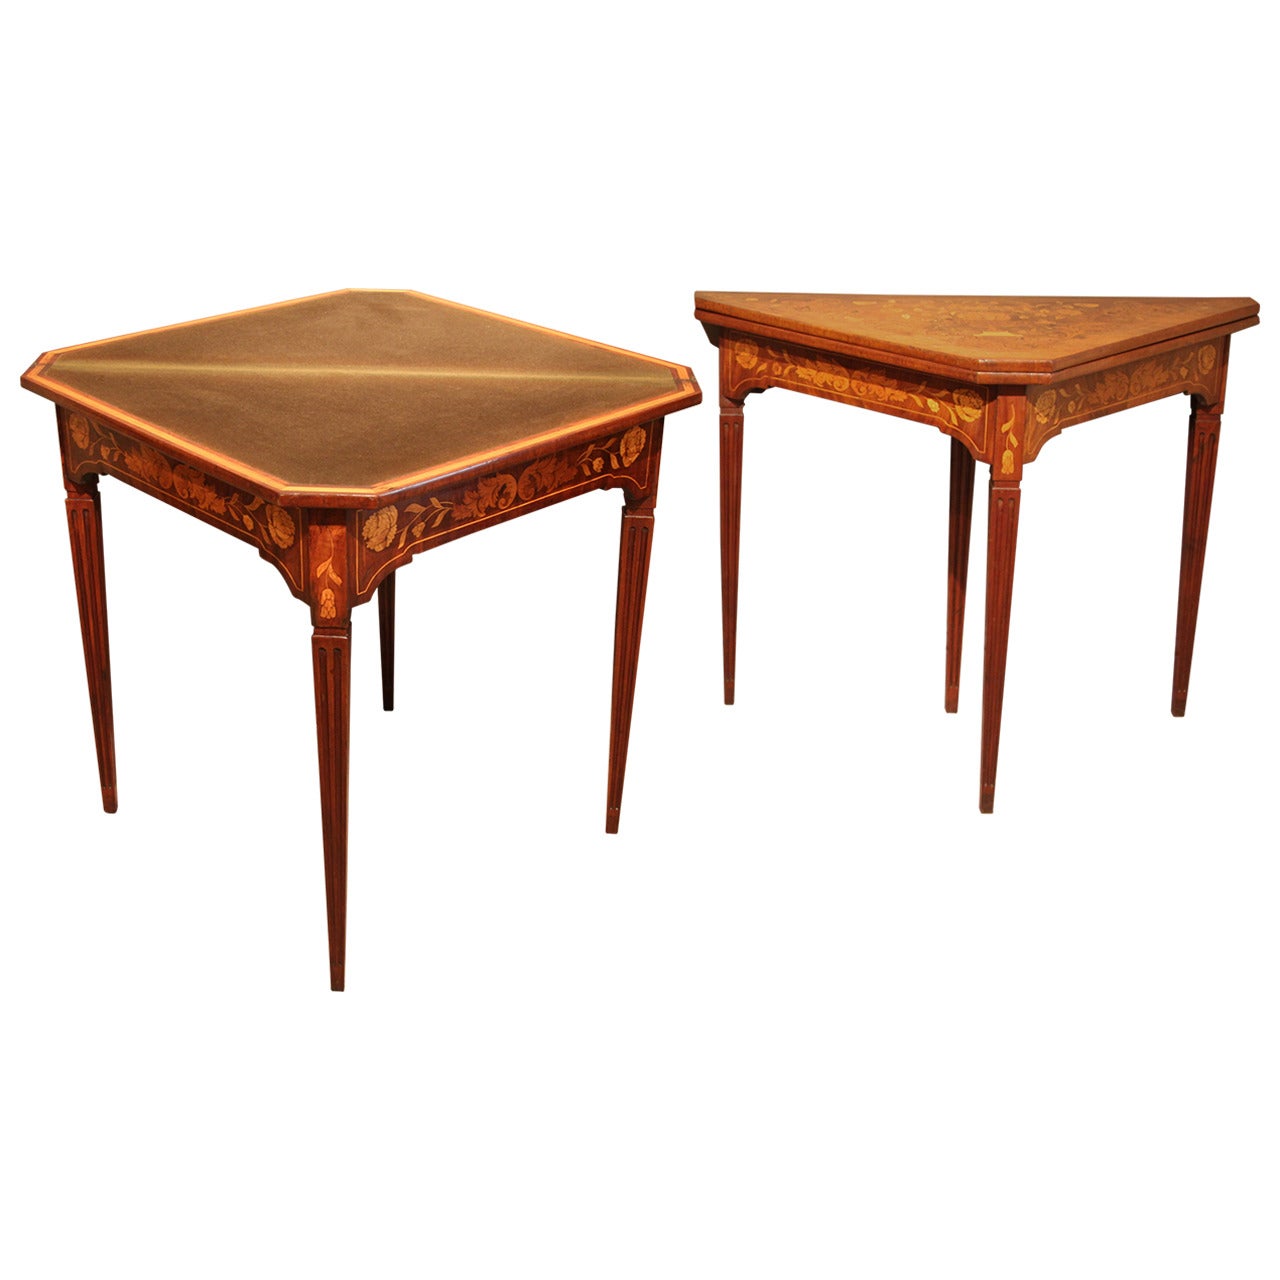 Rare and Very Attractive Pair of Dutch Marquetry Card Tables, circa 1850